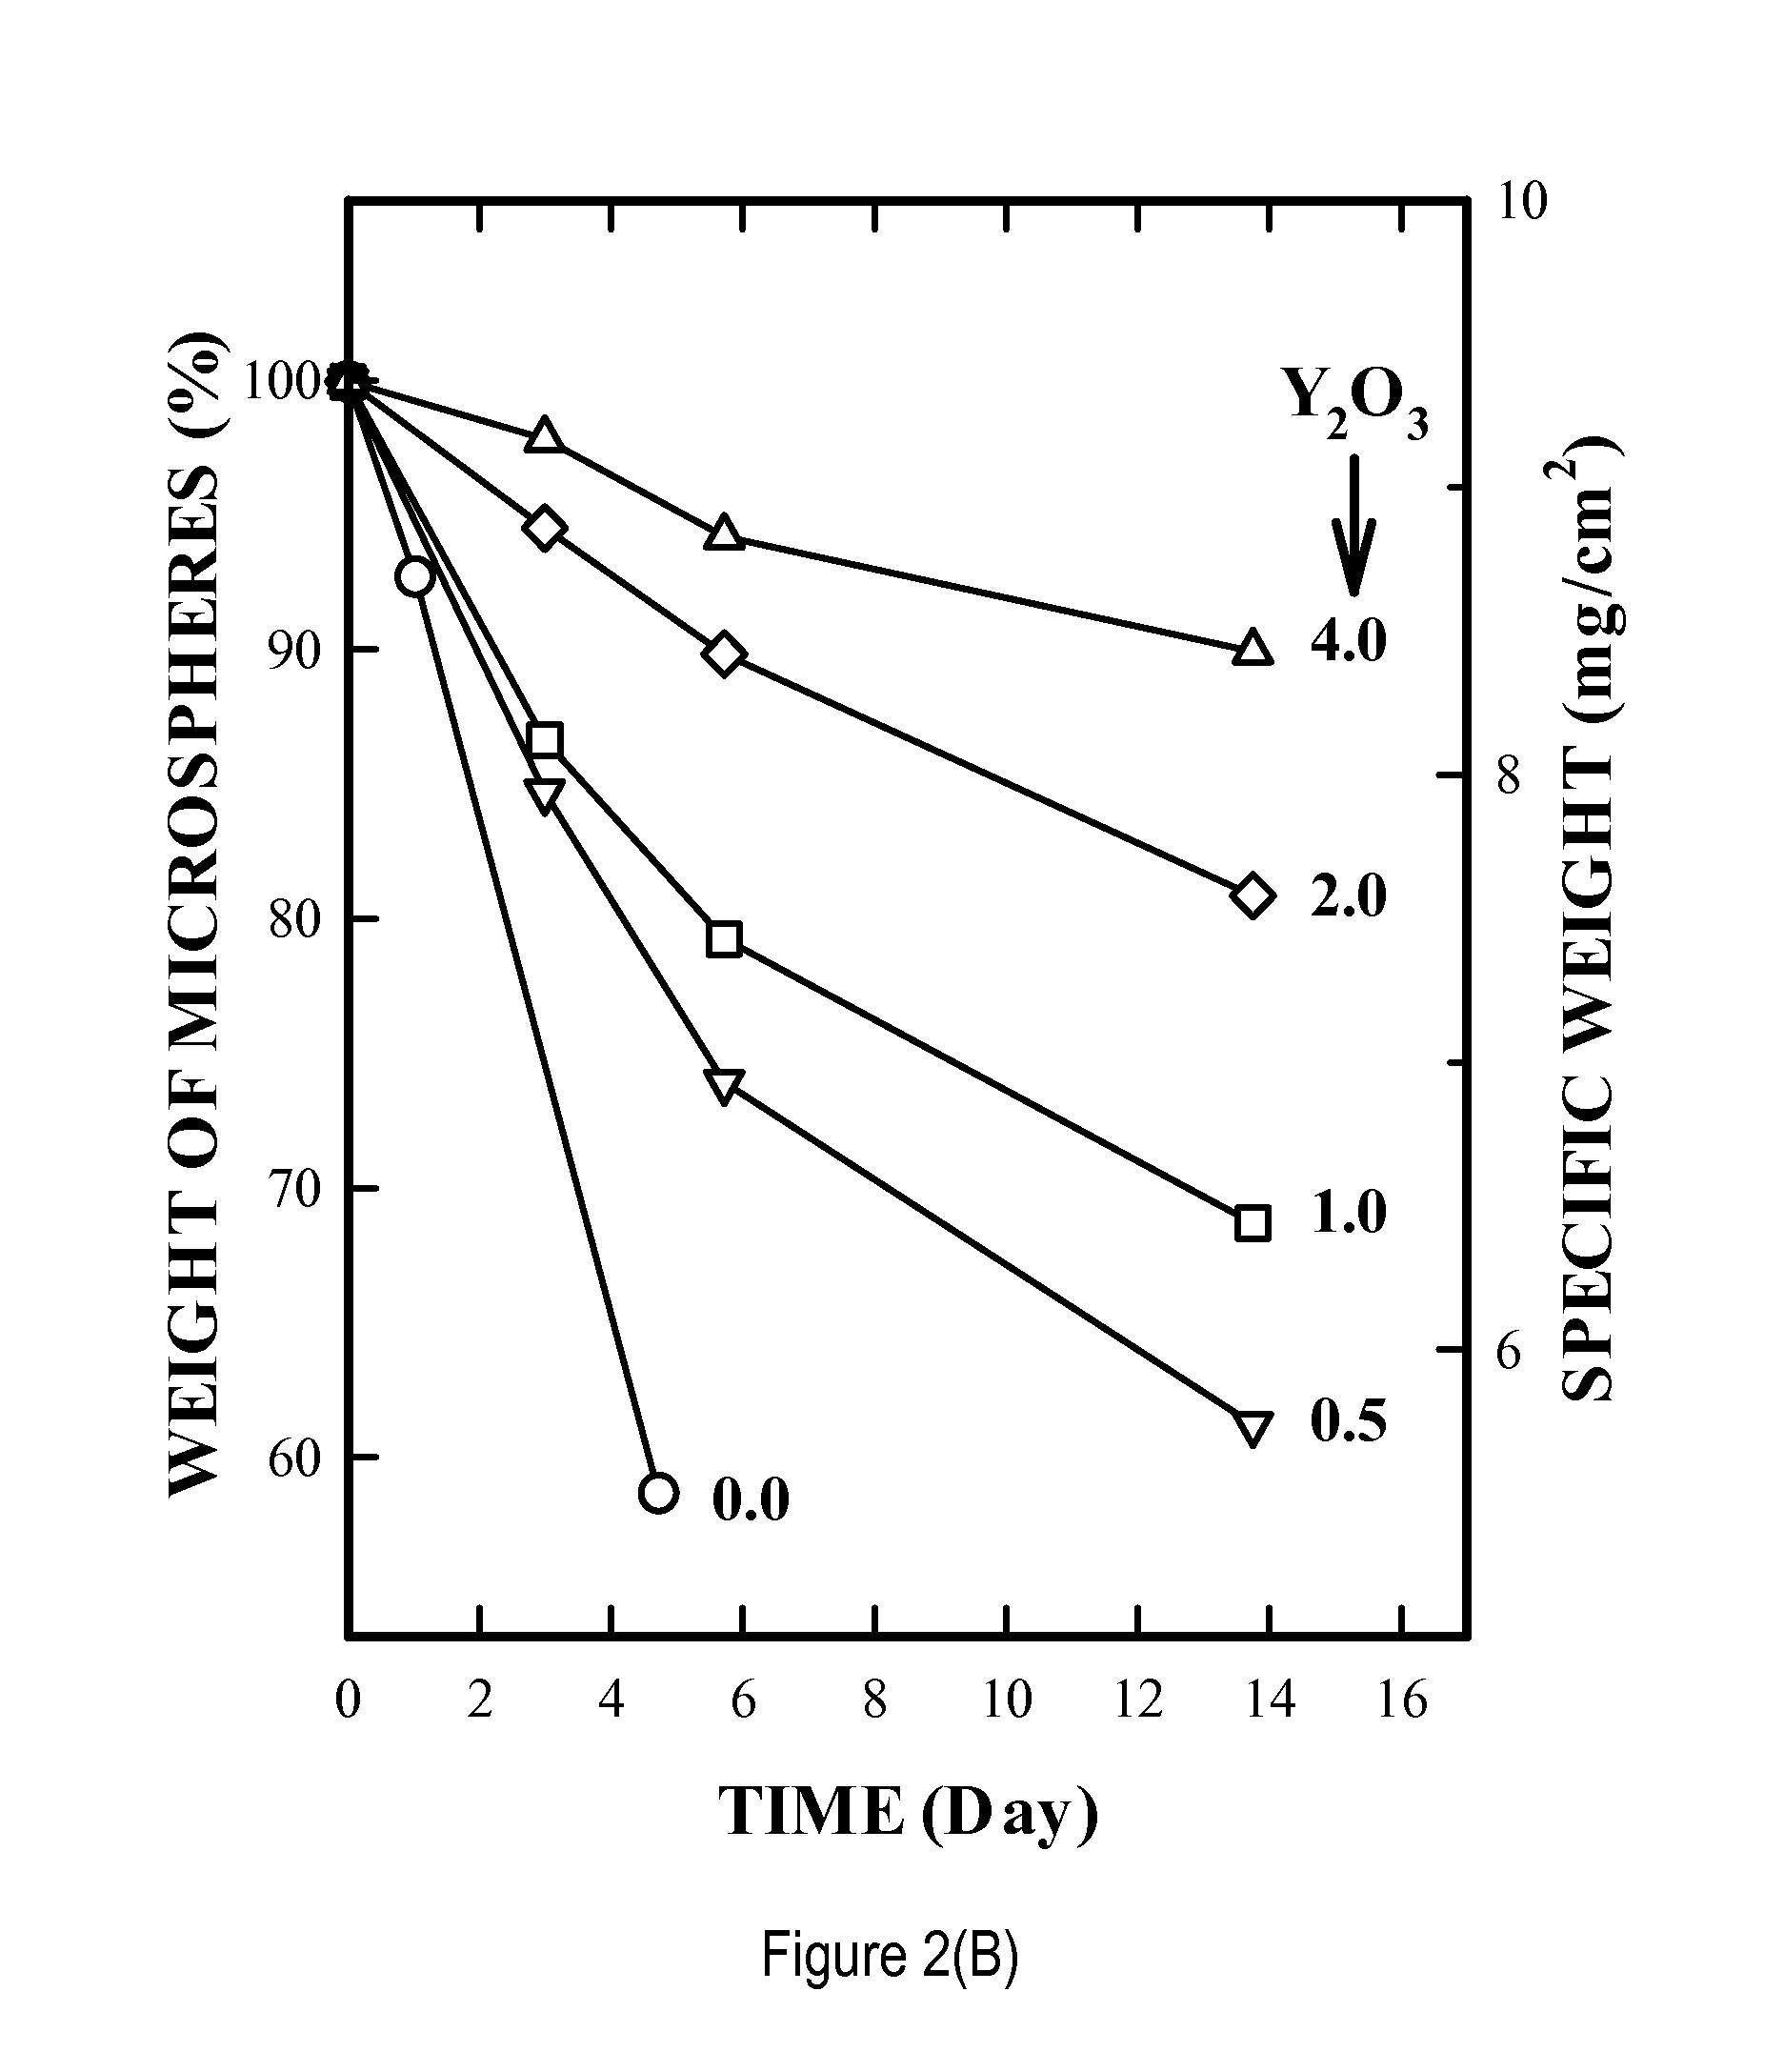 Particulate materials and compositions for radio therapy